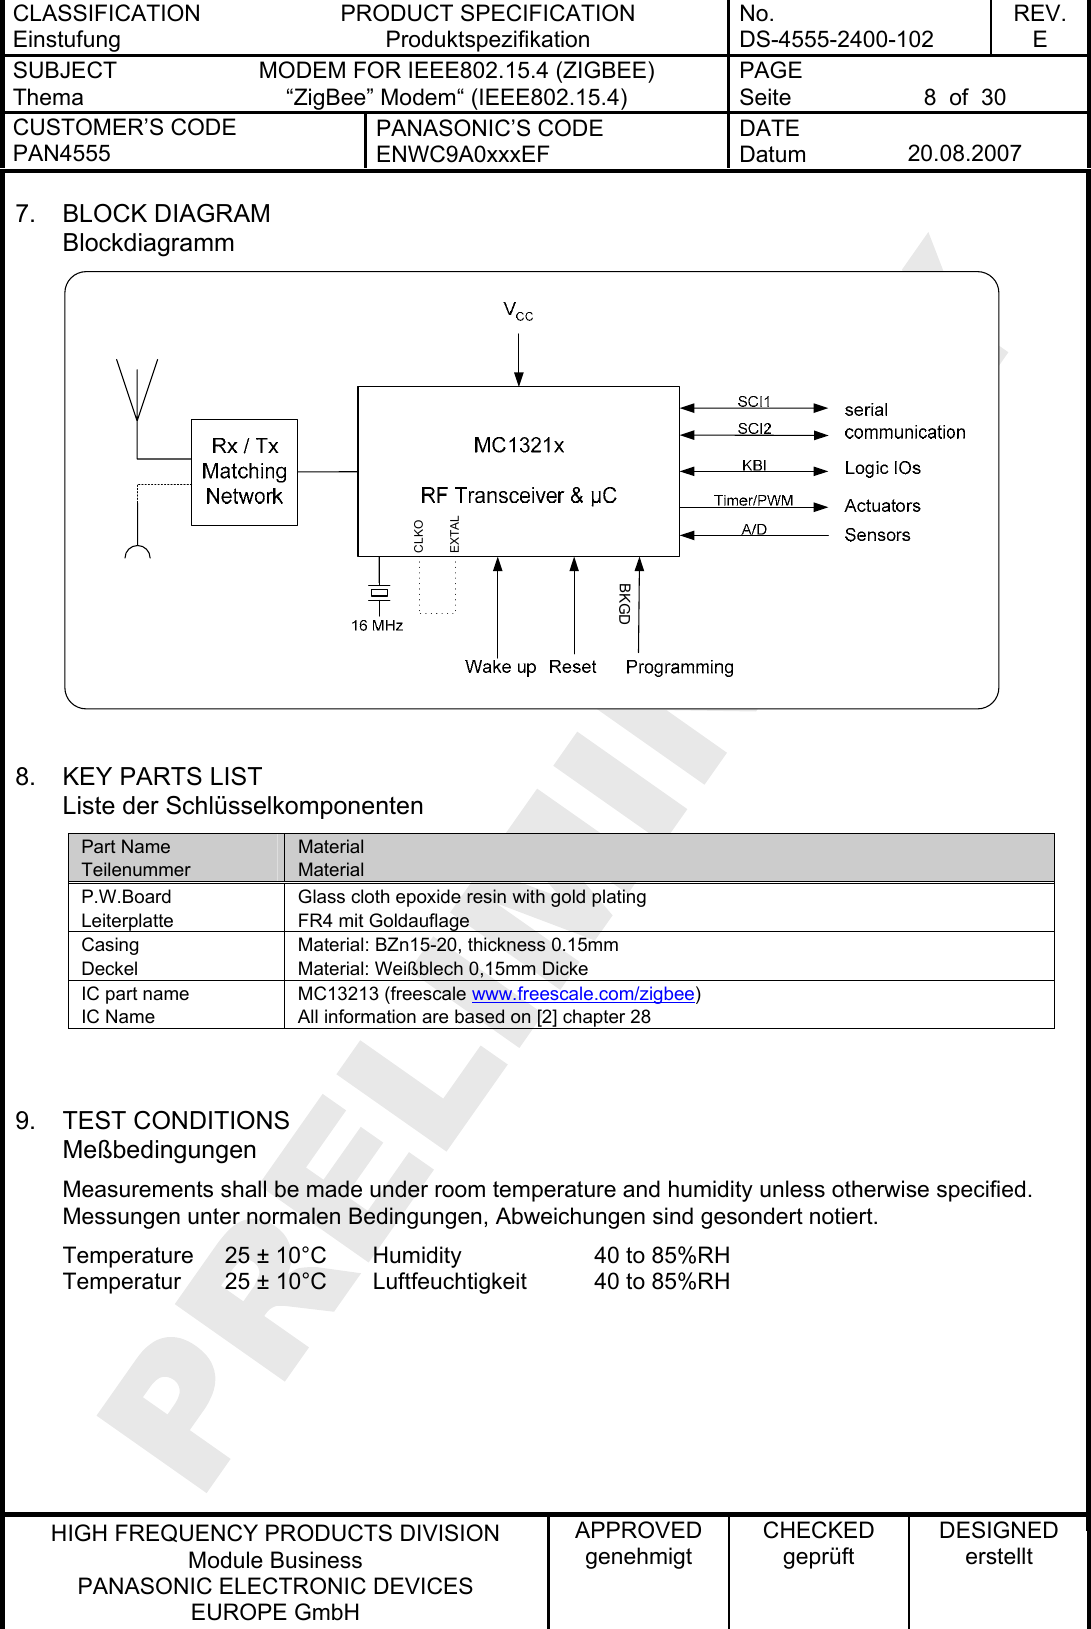 CLASSIFICATION Einstufung PRODUCT SPECIFICATION Produktspezifikation No. DS-4555-2400-102 REV. E SUBJECT Thema MODEM FOR IEEE802.15.4 (ZIGBEE) “ZigBee” Modem“ (IEEE802.15.4) PAGE Seite  8  of  30 CUSTOMER’S CODE PAN4555 PANASONIC’S CODE ENWC9A0xxxEF DATE Datum  20.08.2007   HIGH FREQUENCY PRODUCTS DIVISION Module Business PANASONIC ELECTRONIC DEVICES  EUROPE GmbH APPROVED genehmigt CHECKED geprüft DESIGNED erstellt 7. BLOCK DIAGRAM Blockdiagramm BKGDCLKOEXTAL  8.  KEY PARTS LIST Liste der Schlüsselkomponenten Part Name Teilenummer Material Material P.W.Board Leiterplatte Glass cloth epoxide resin with gold plating  FR4 mit Goldauflage Casing Deckel Material: BZn15-20, thickness 0.15mm Material: Weißblech 0,15mm Dicke IC part name IC Name MC13213 (freescale www.freescale.com/zigbee) All information are based on [2] chapter 28   9. TEST CONDITIONS Meßbedingungen Measurements shall be made under room temperature and humidity unless otherwise specified. Messungen unter normalen Bedingungen, Abweichungen sind gesondert notiert. Temperature  25 ± 10°C  Humidity    40 to 85%RH Temperatur  25 ± 10°C  Luftfeuchtigkeit  40 to 85%RH   